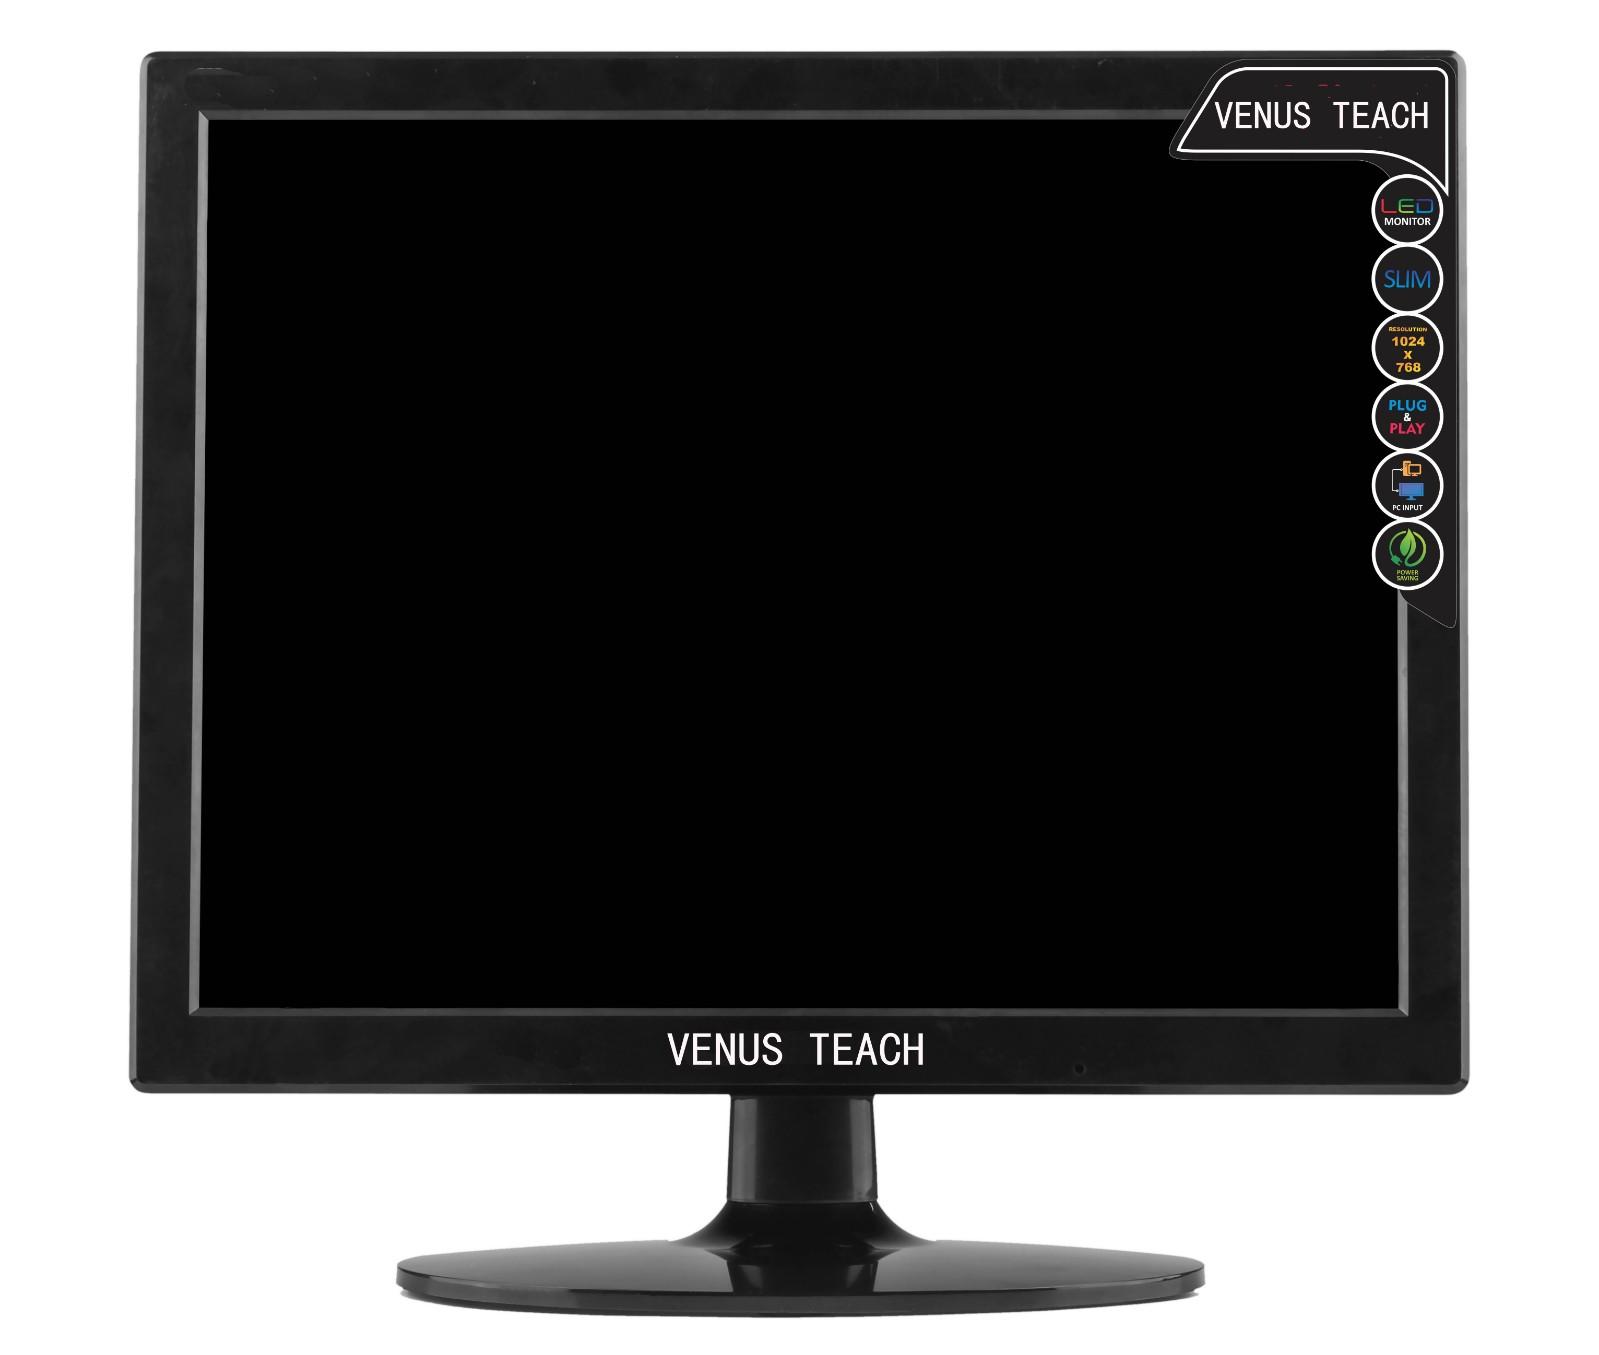 solid mesh 15 inch lcd monitor supplier for lcd tv screen